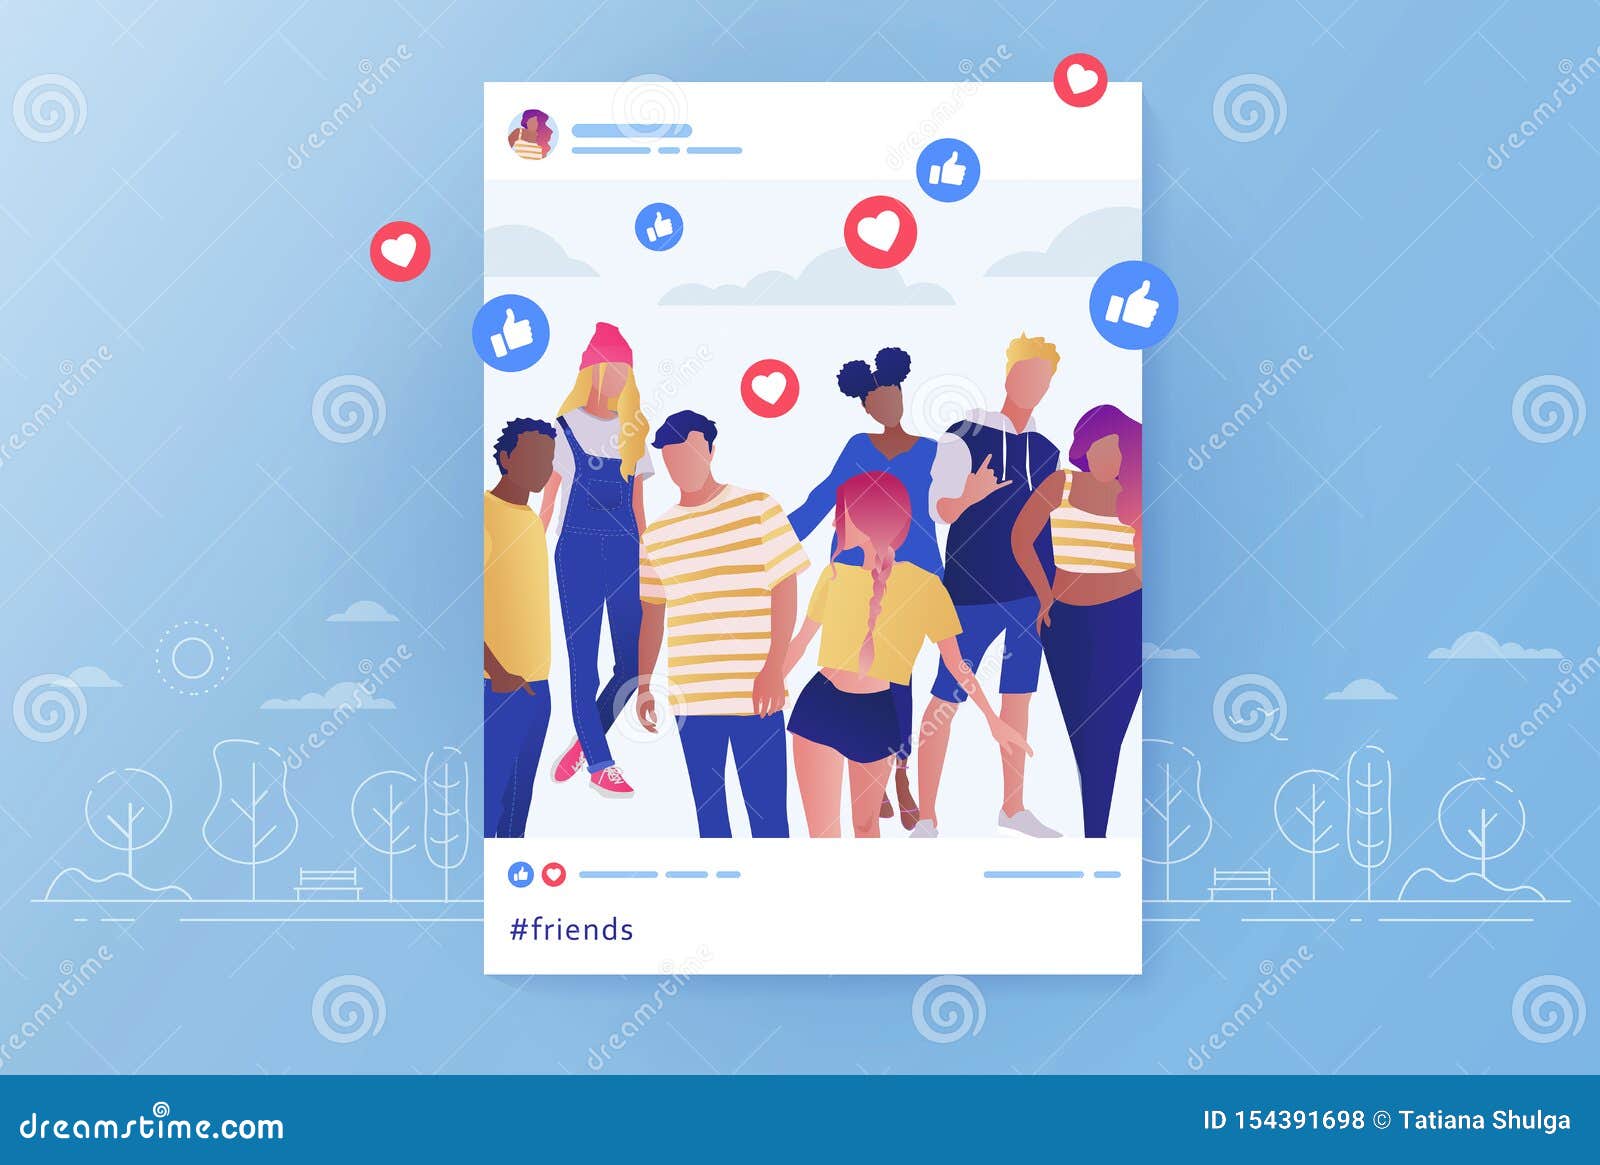 friends group photo posted in social media and comments and likes for that post. flat cartoon  